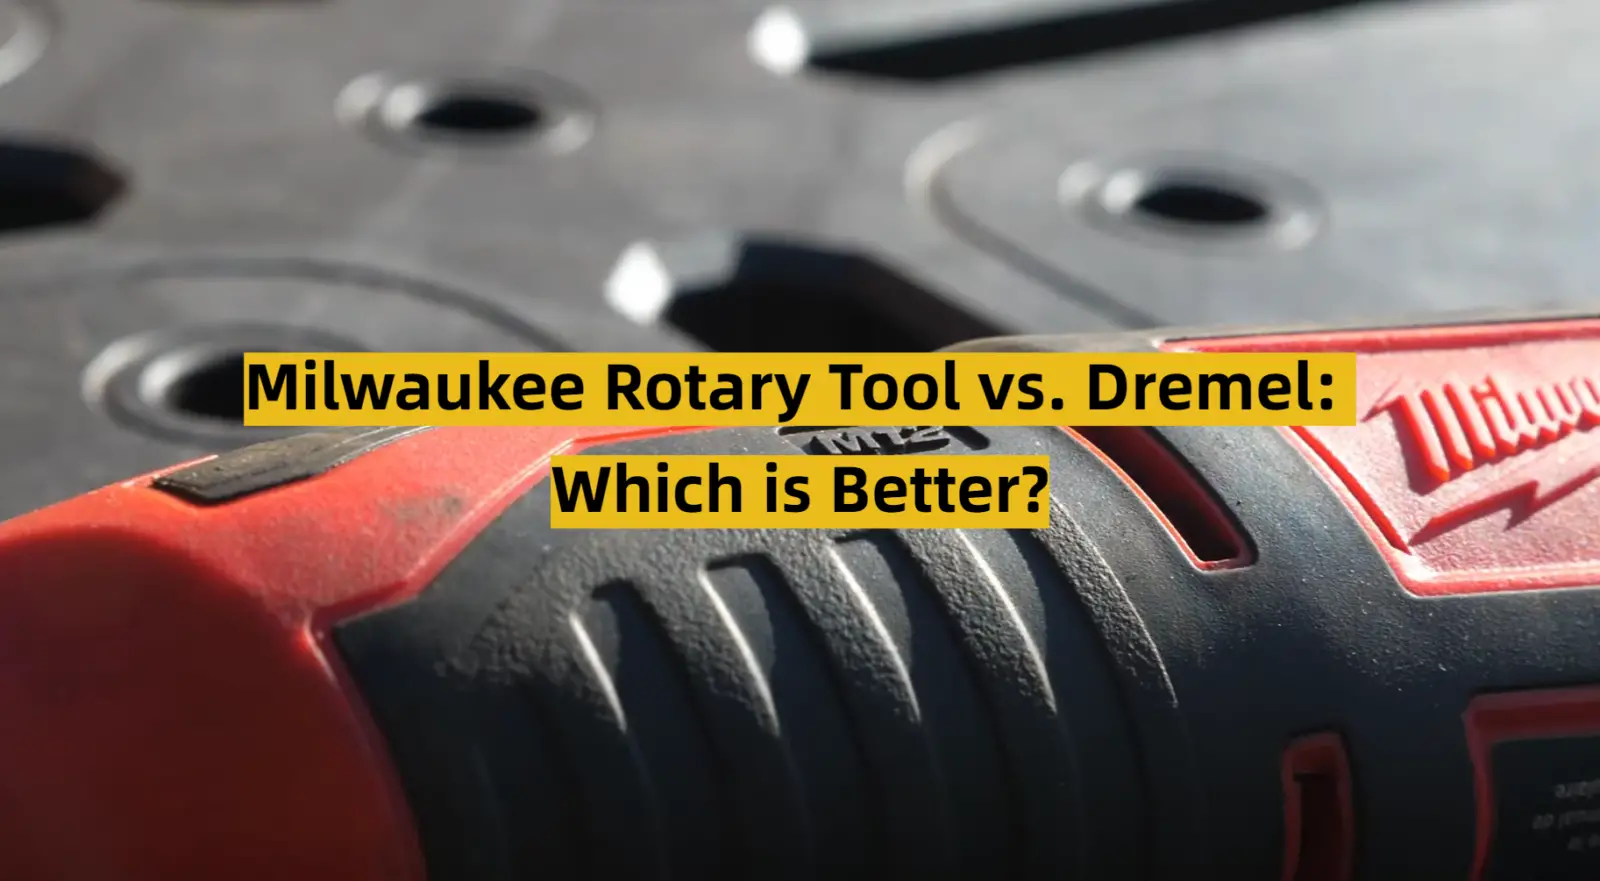 Milwaukee Rotary Tool vs. Dremel: Which is Better?